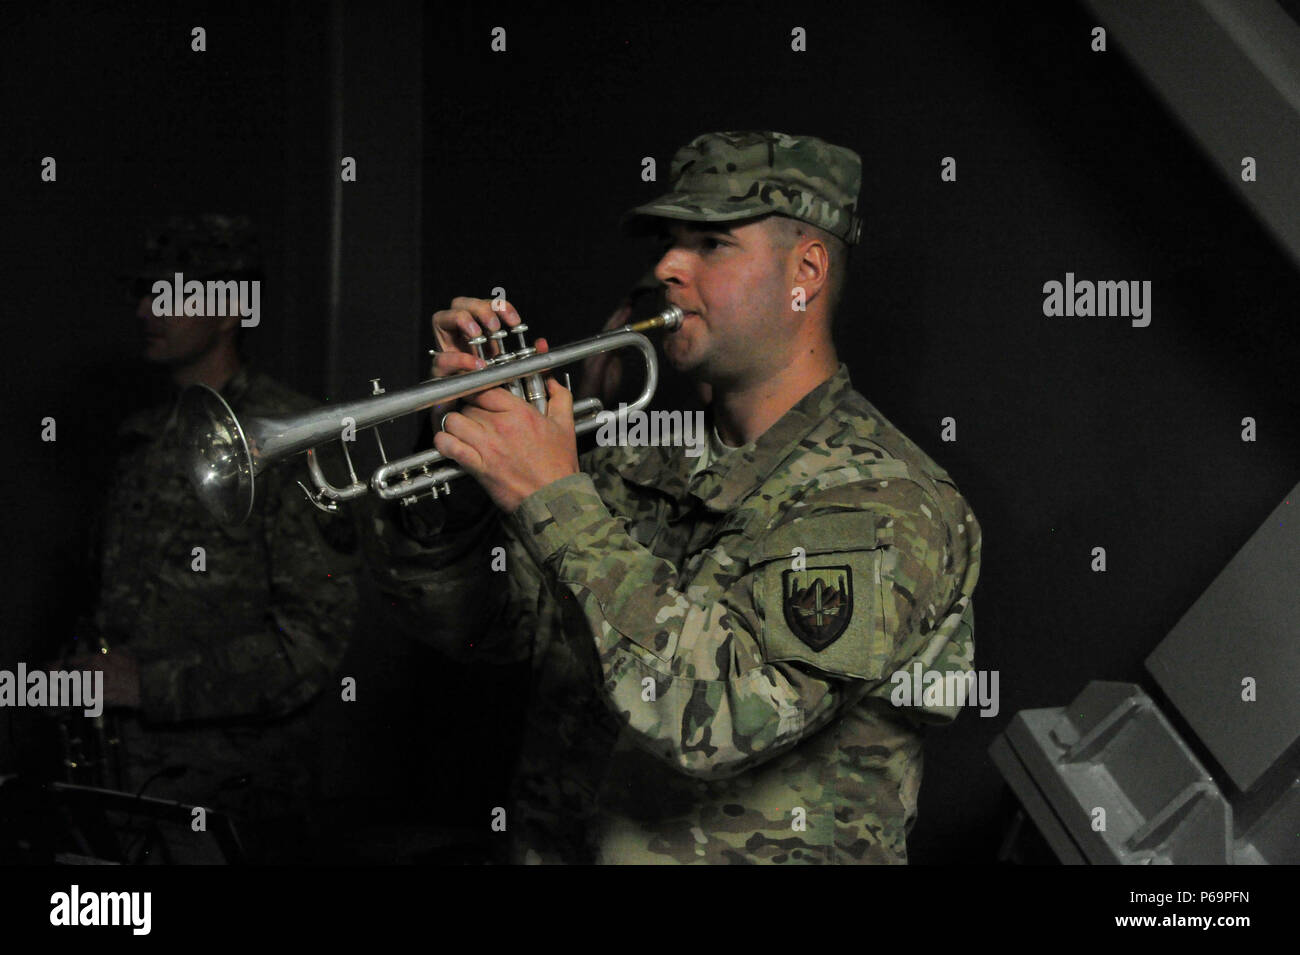 https://c8.alamy.com/comp/P69PFN/bagram-air-field-afghanistan-may-302016-us-army-spc-joseph-faust-10th-mountain-divison-sounded-a-stirring-rendition-of-taps-to-lead-into-a-moment-of-silence-during-the-us-forces-afghanistan-memorial-day-observance-held-here-today-photo-by-bob-harrison-us-forces-afghanistan-public-affairs-P69PFN.jpg